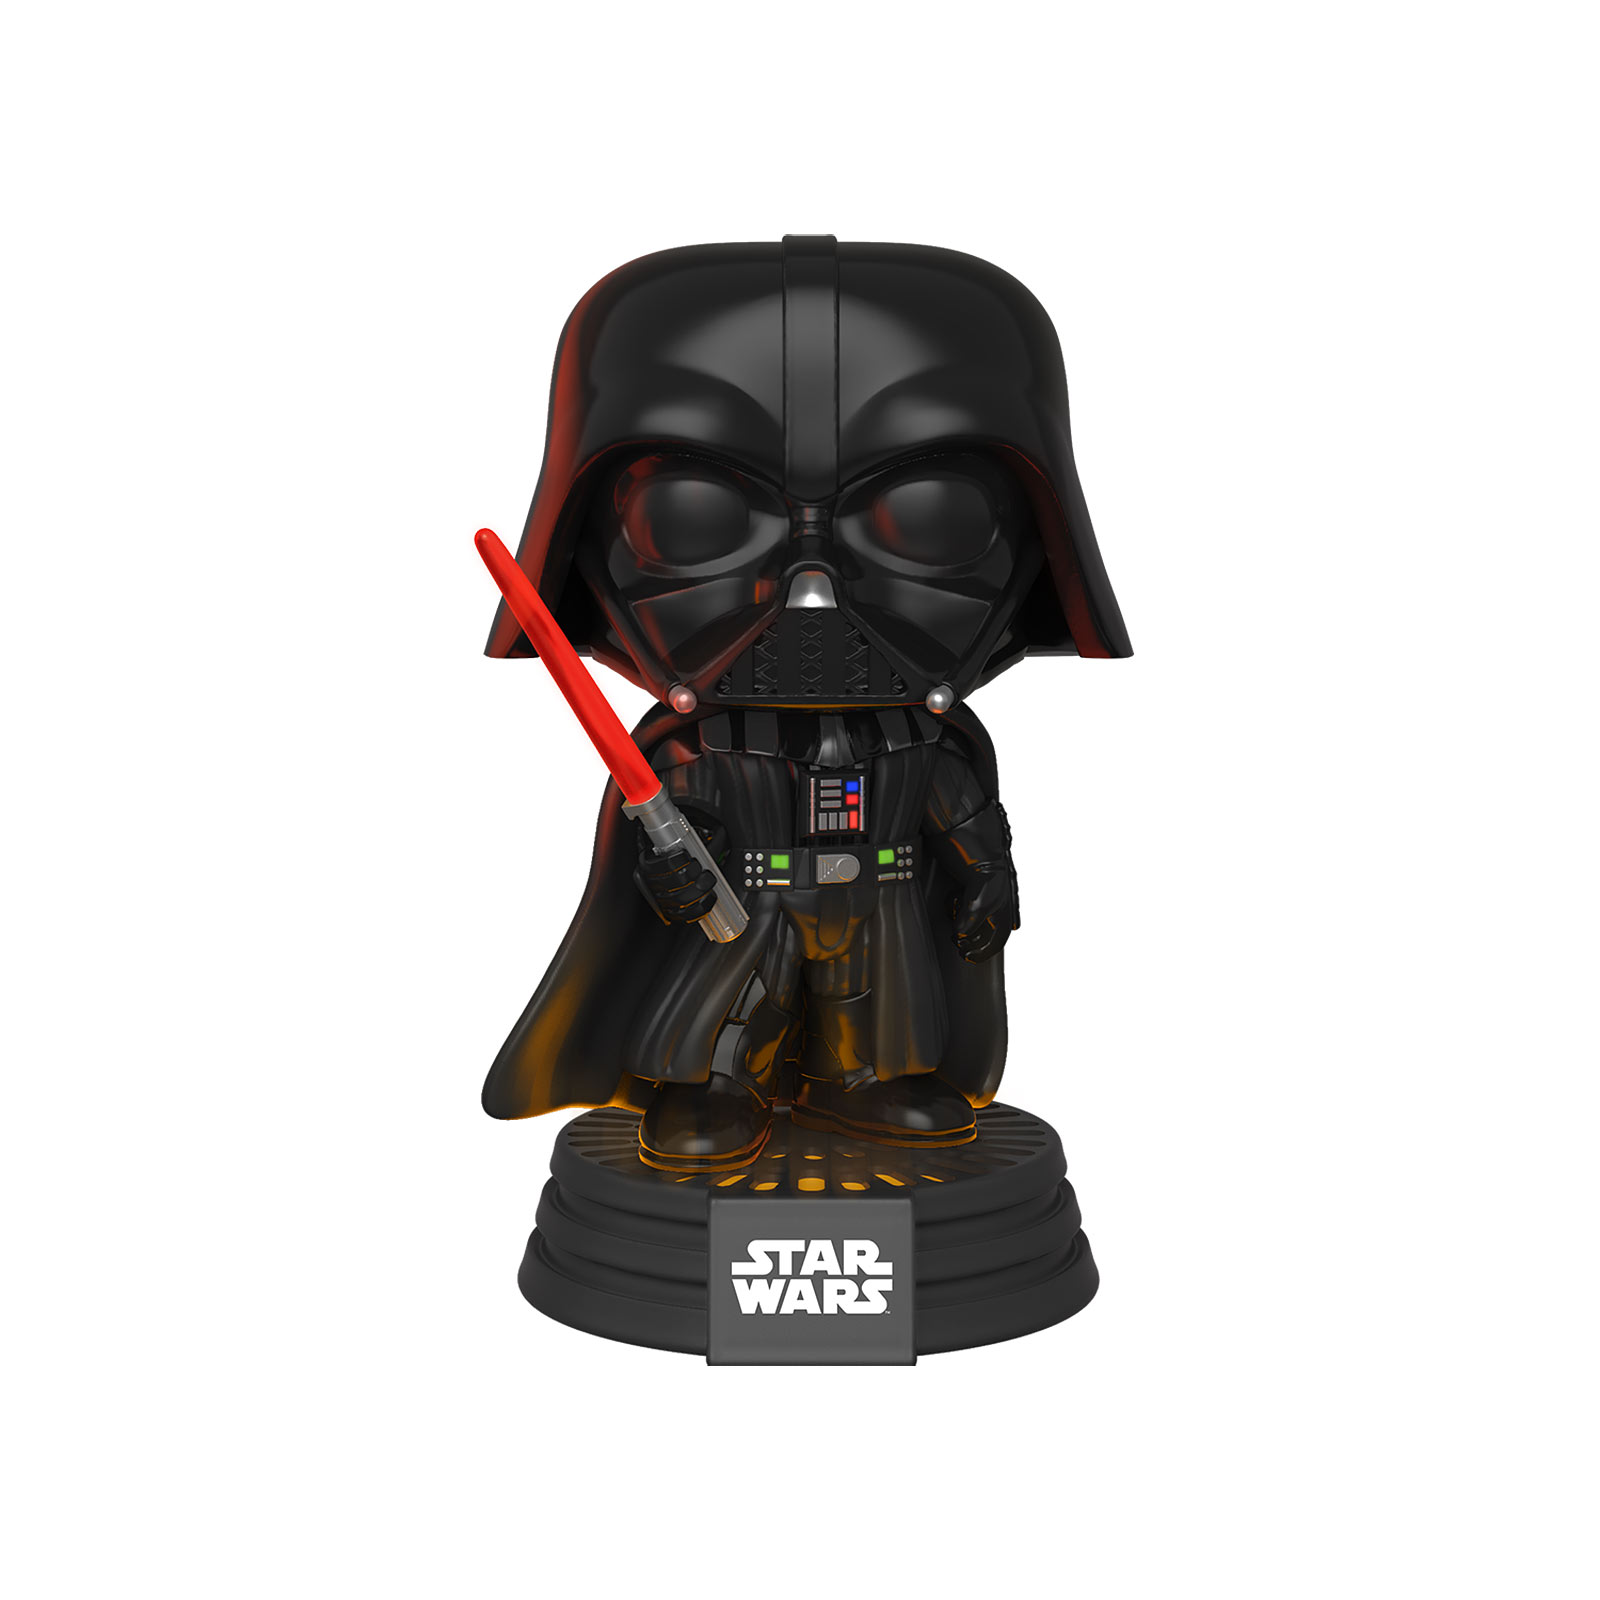 Star Wars - Darth Vader Funko Pop Bobblehead Figure with Light and Sound